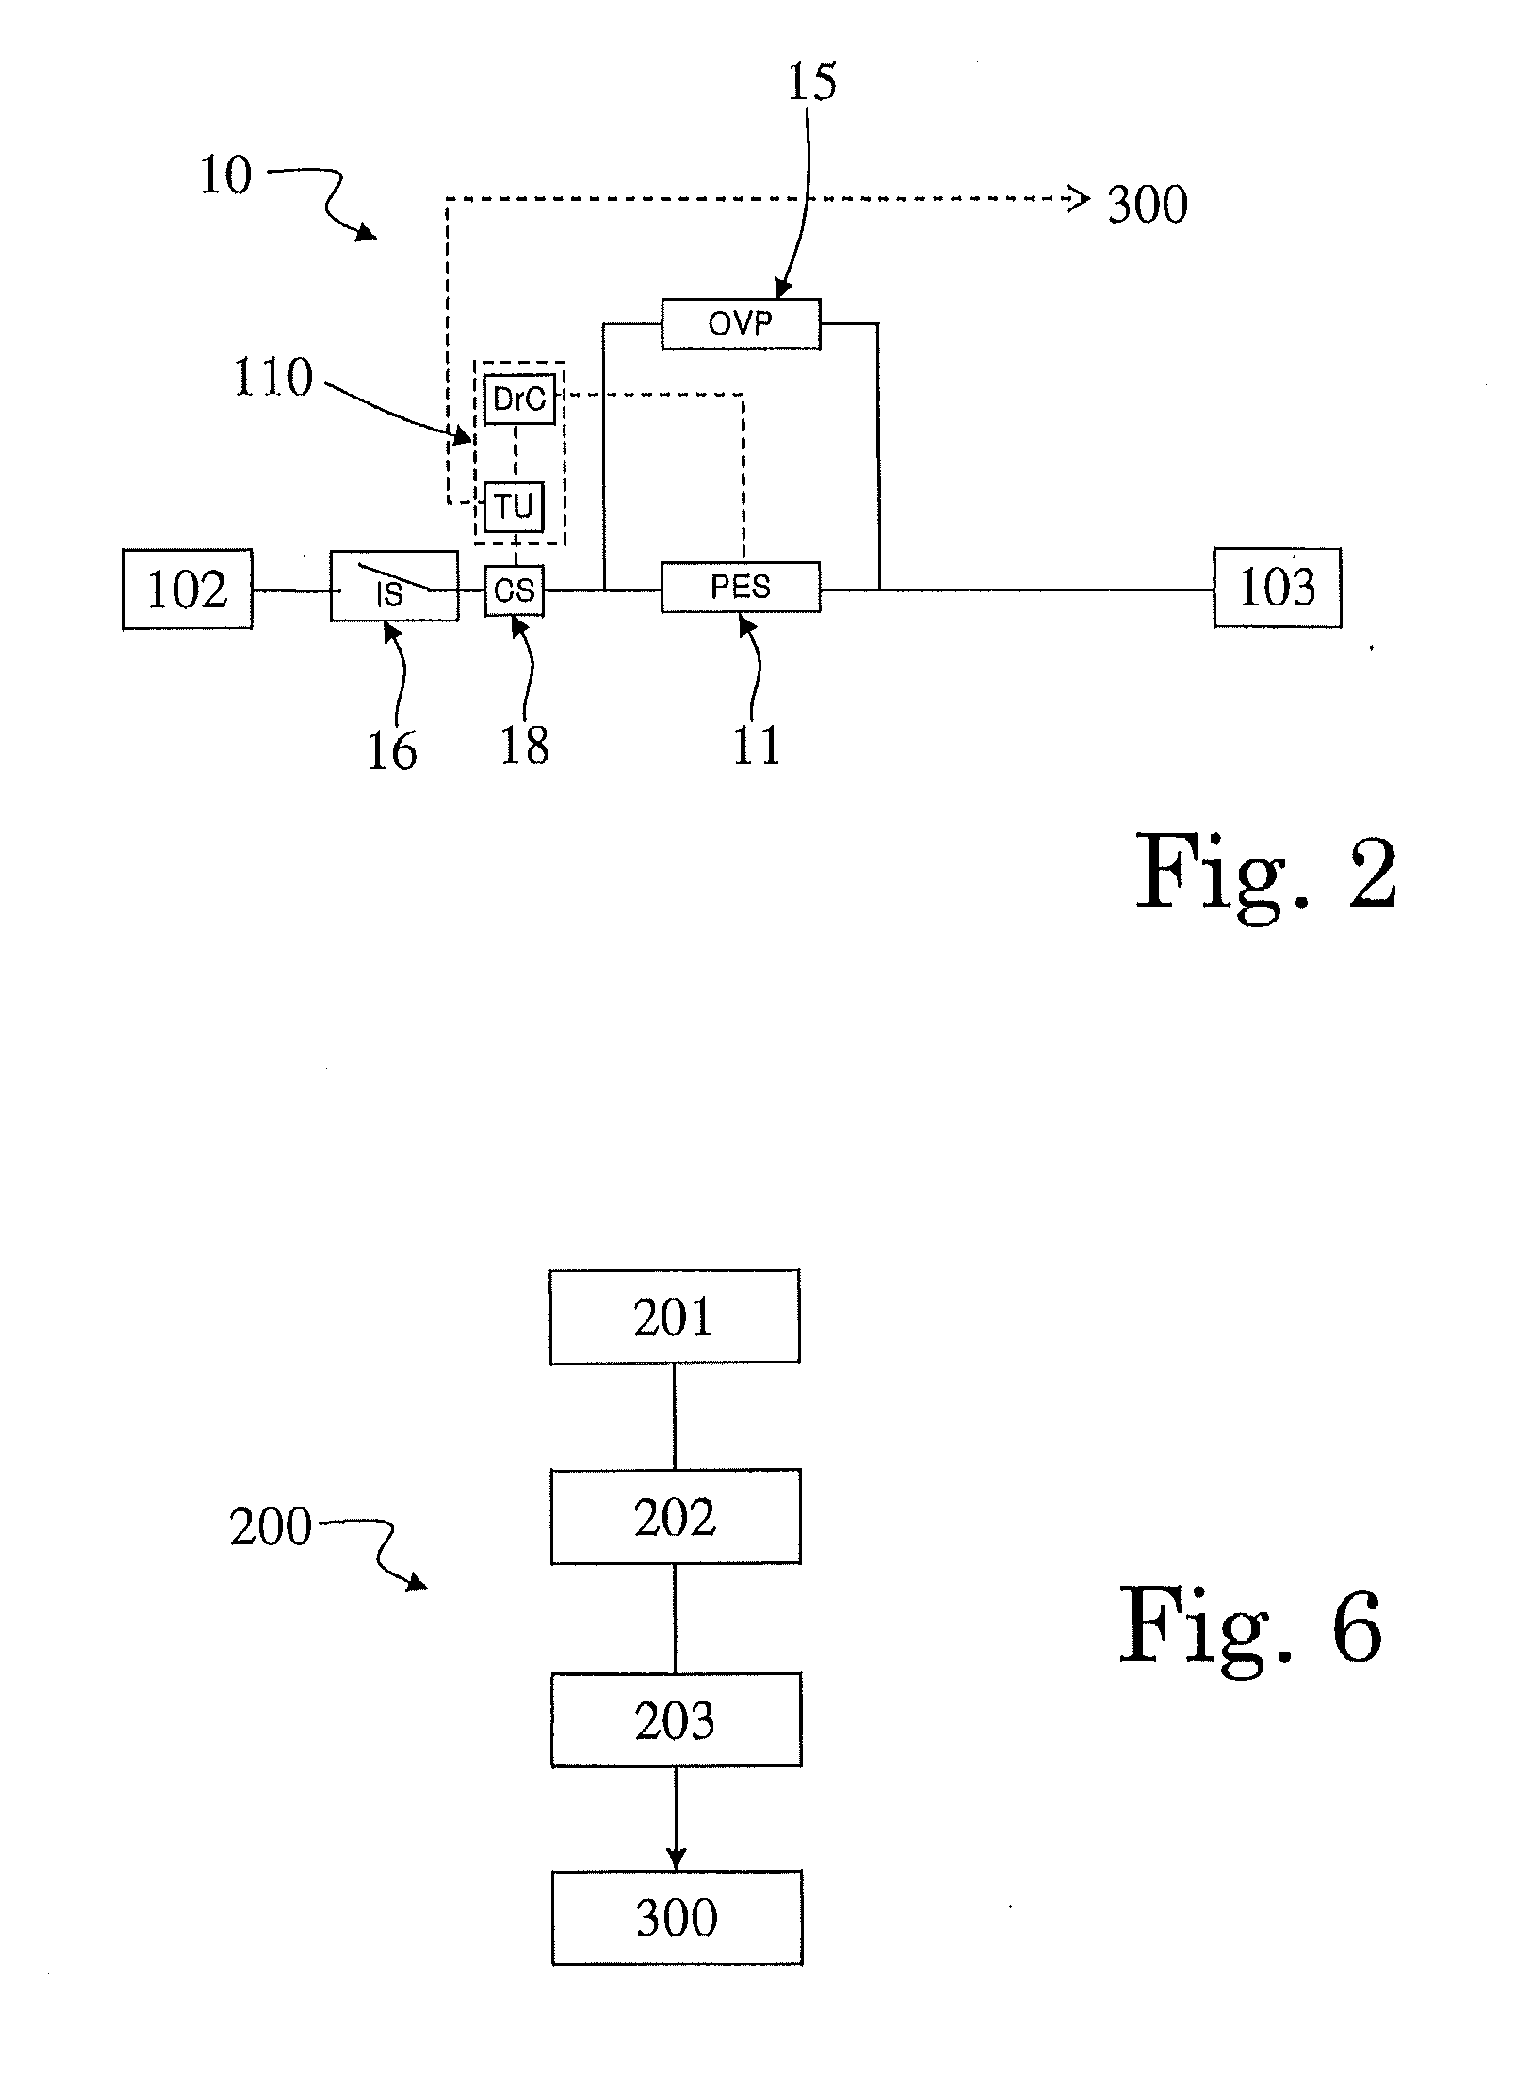 System and method for protecting an electrical grid against faults